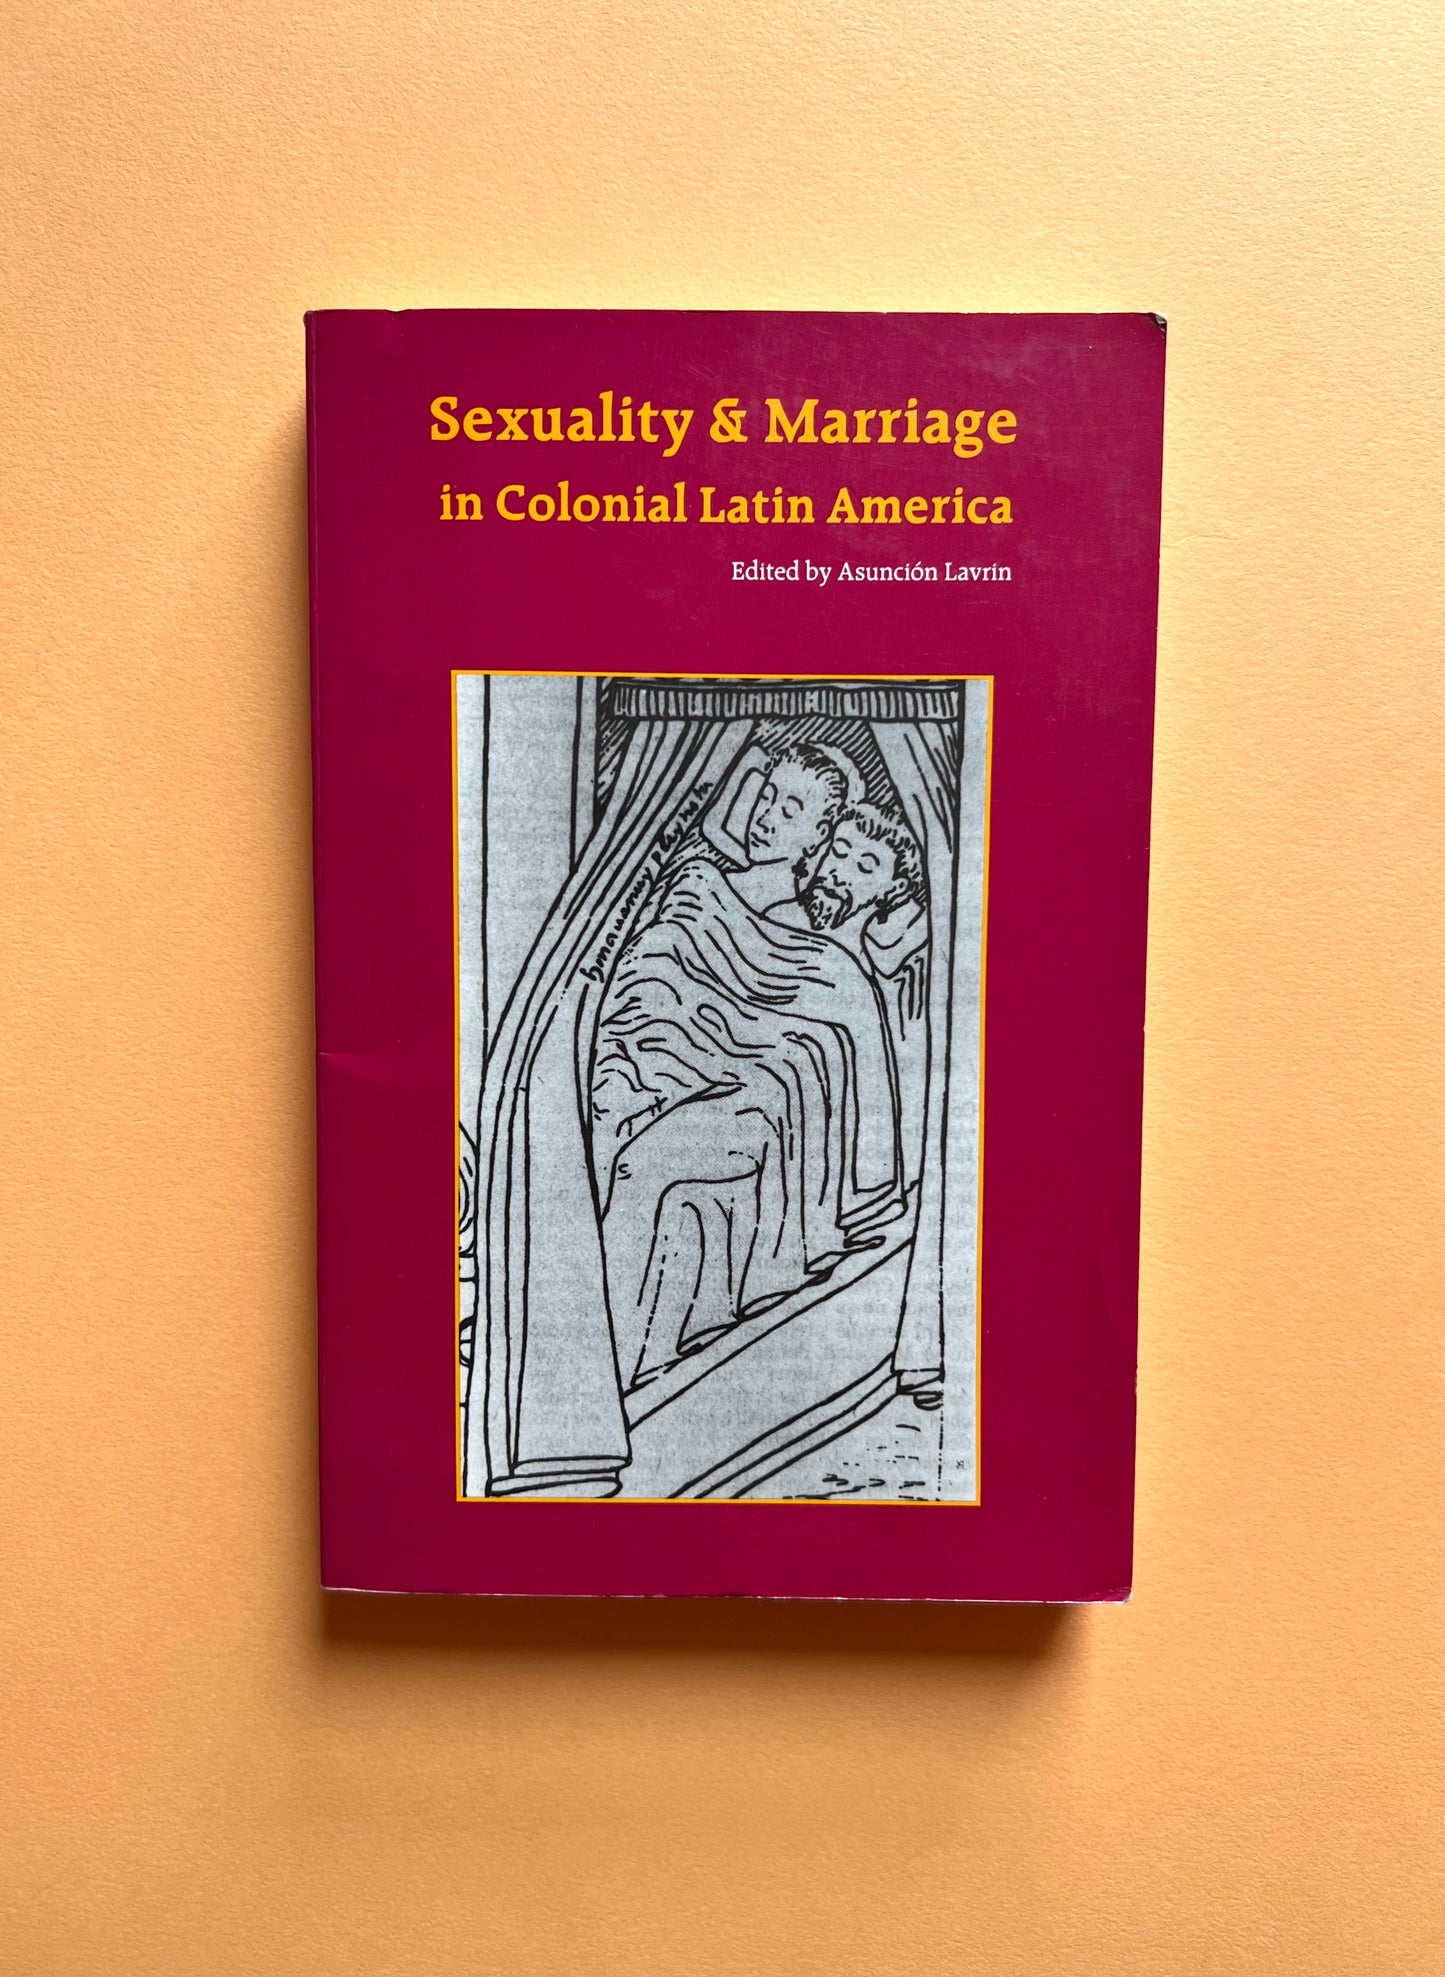 Sexuality & Marriage in Colonial Latin America